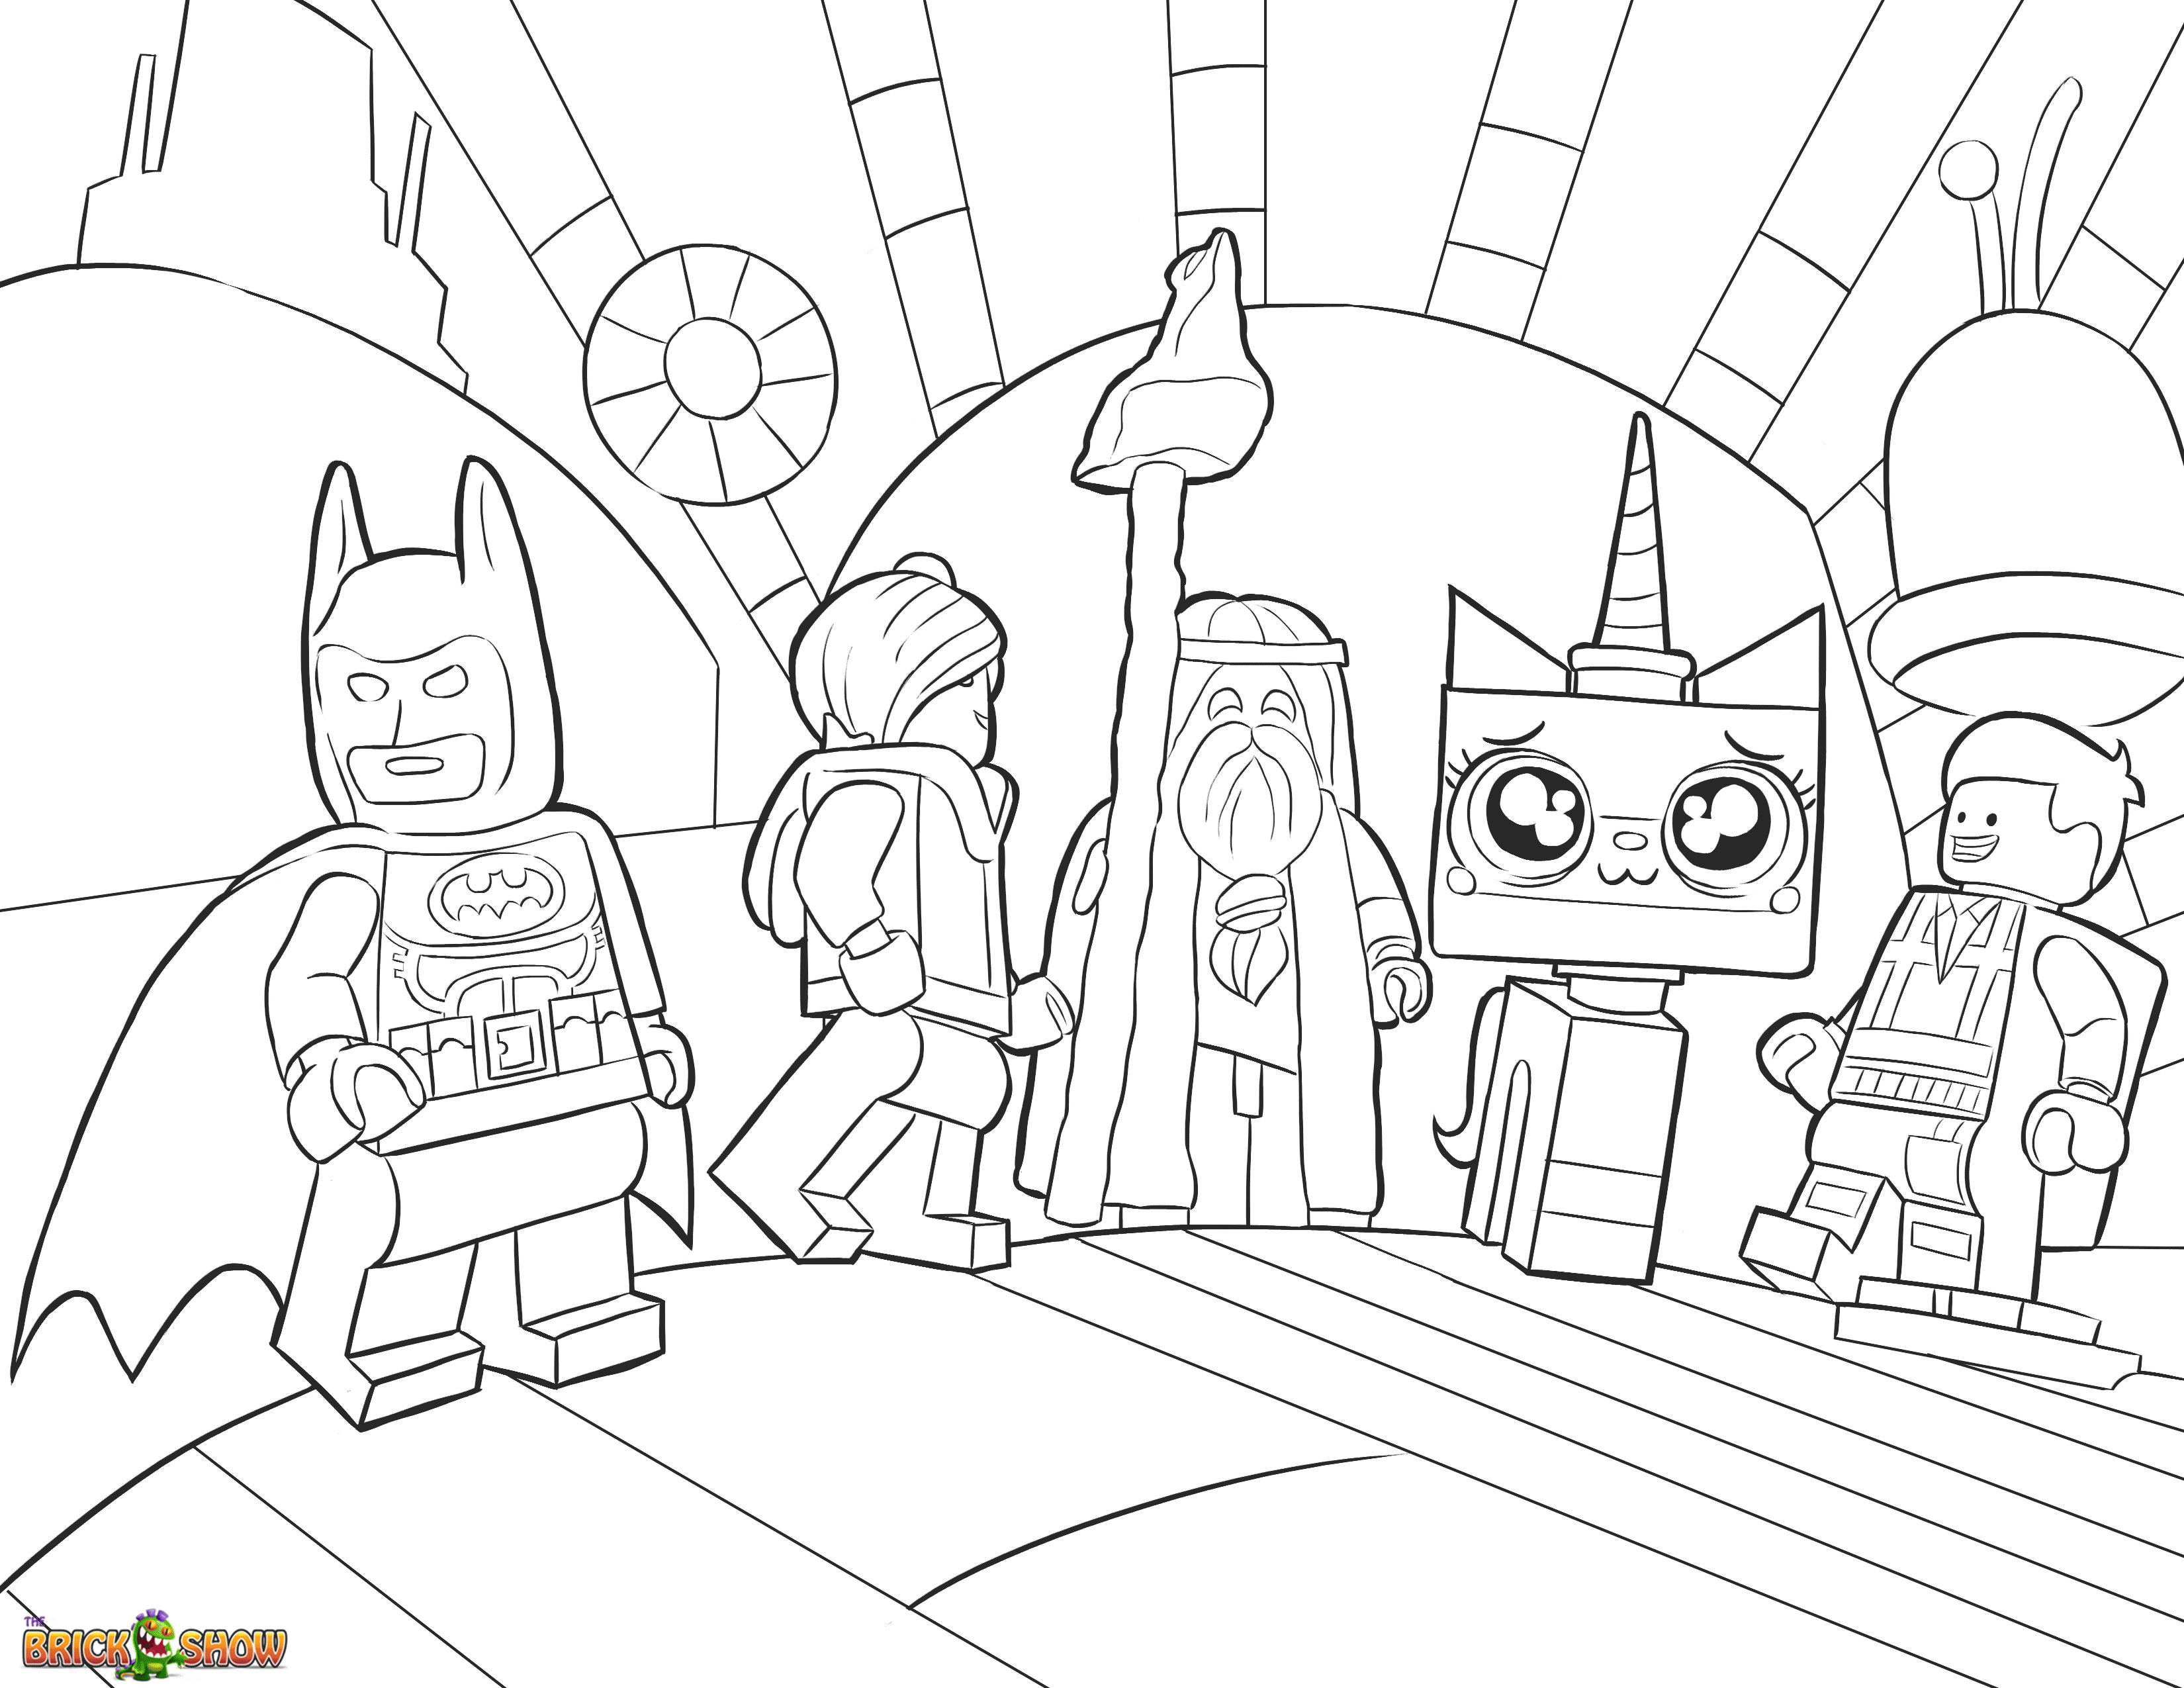 Lego Movie Coloring Pages - Coloring Home